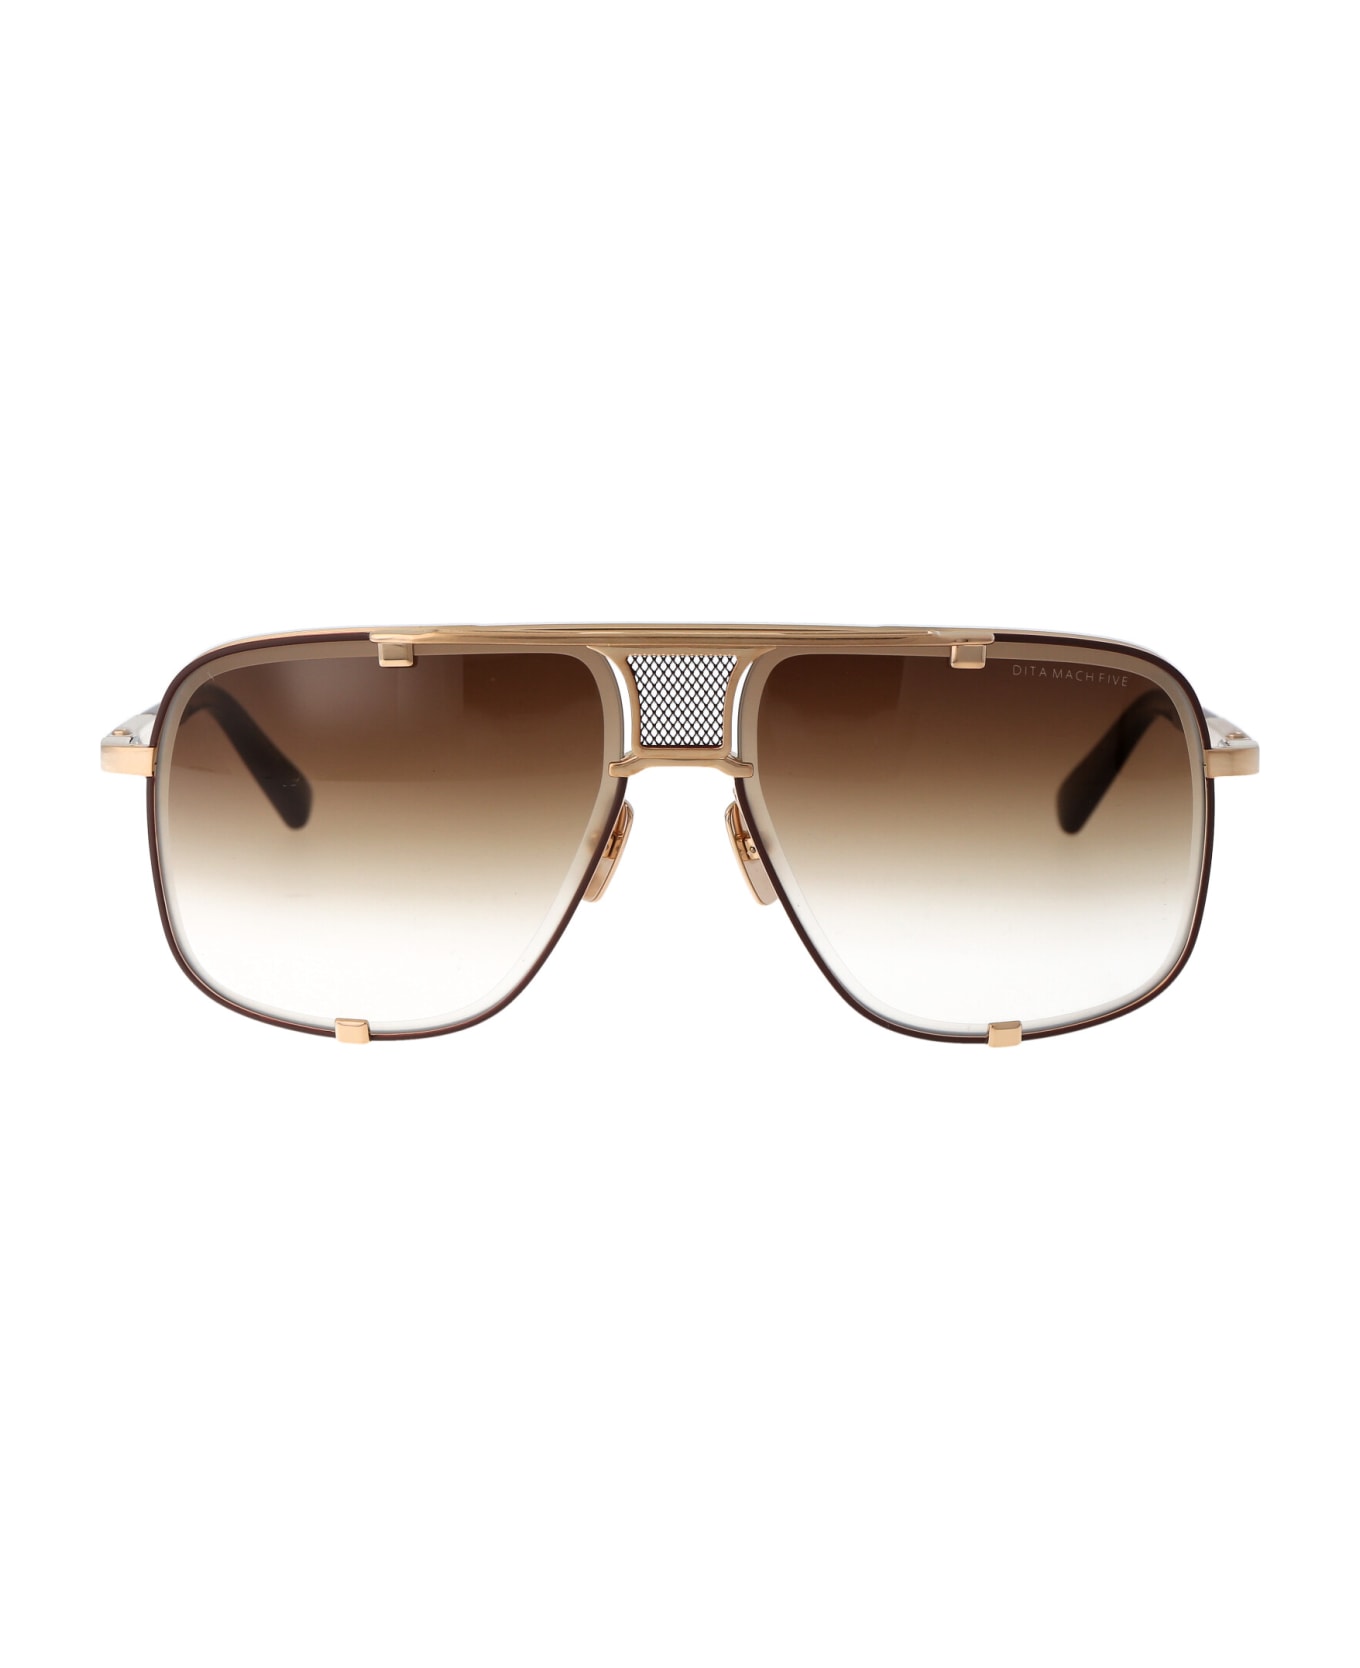 Dita Mach-five Sunglasses - Brushed White Gold - Brown w/ Brown Gradient